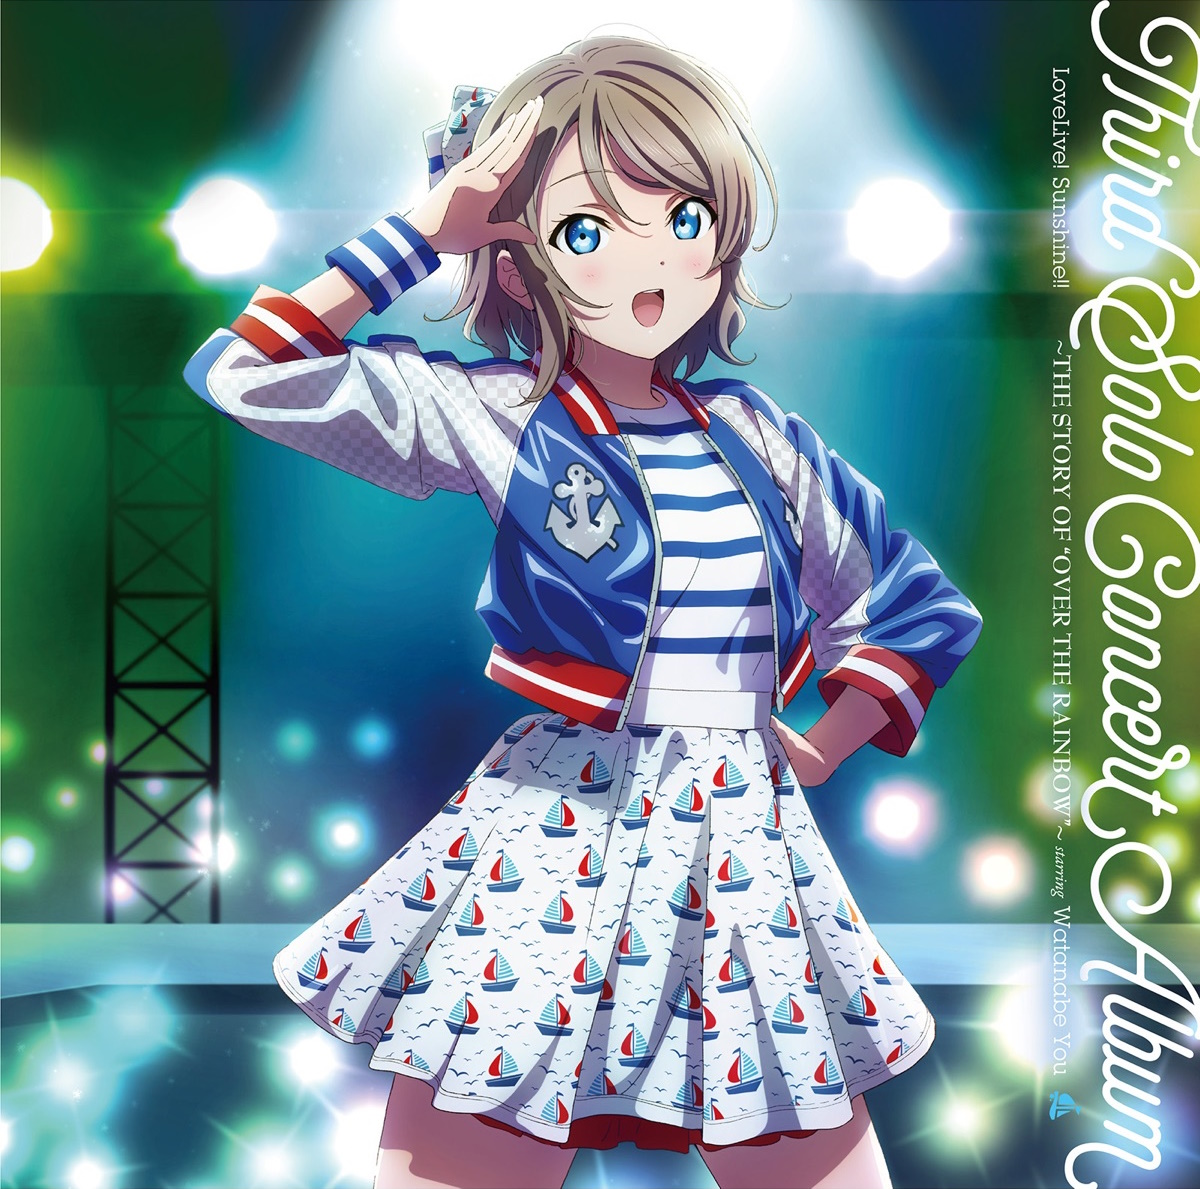 Cover art for『You Watanabe (Shuka Saito) from Aqours - 海空のオーロラ』from the release『LoveLive! Sunshine!! Third Solo Concert Album ～THE STORY OF 